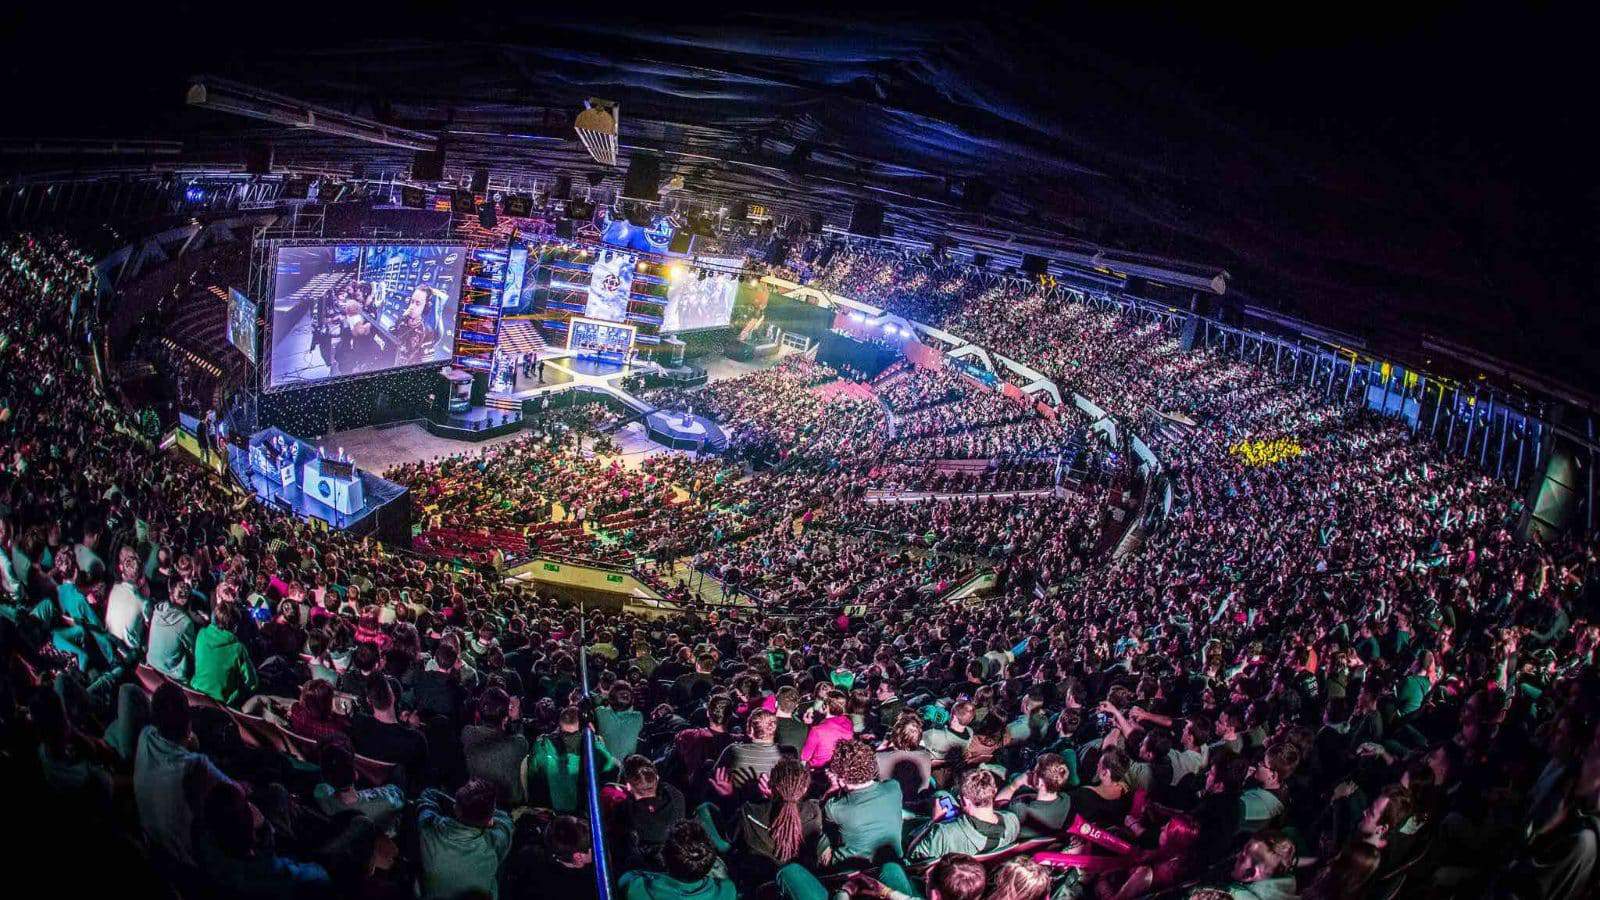 Esports Betting Is Taking Off, Which Games Are The Most Popular?